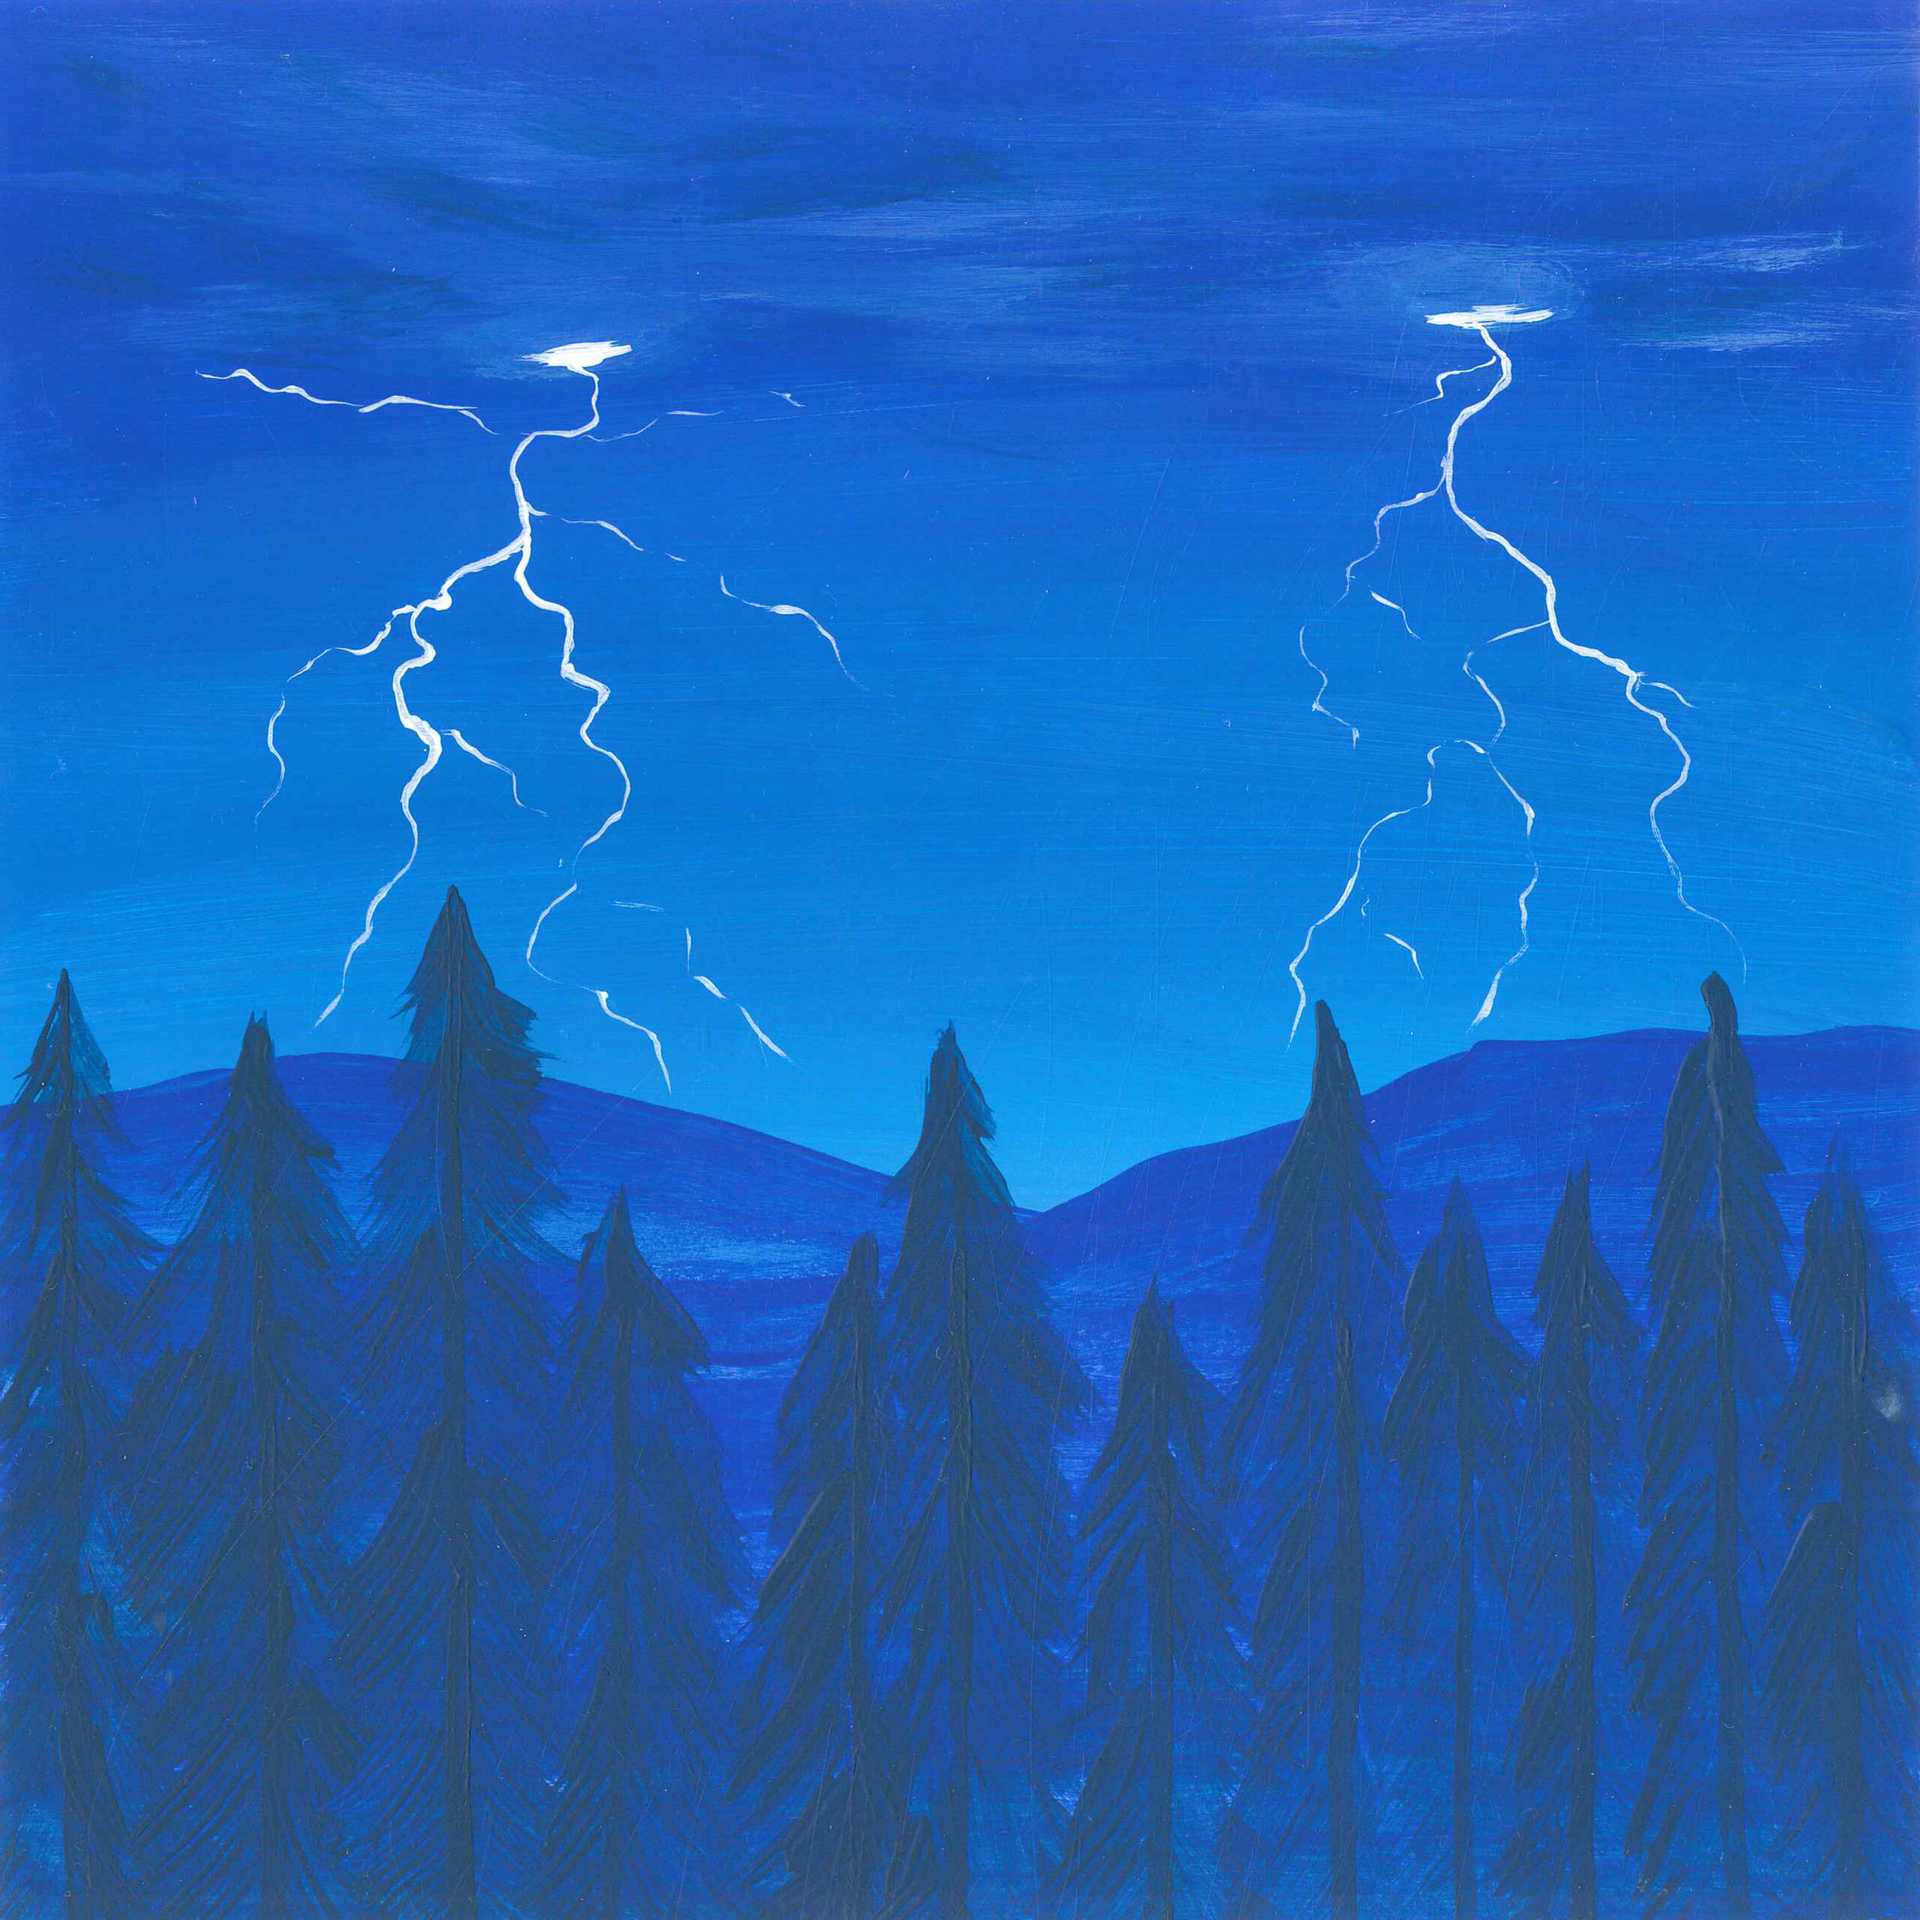 Summer Storm in Alps - nature landscape painting - earth.fm